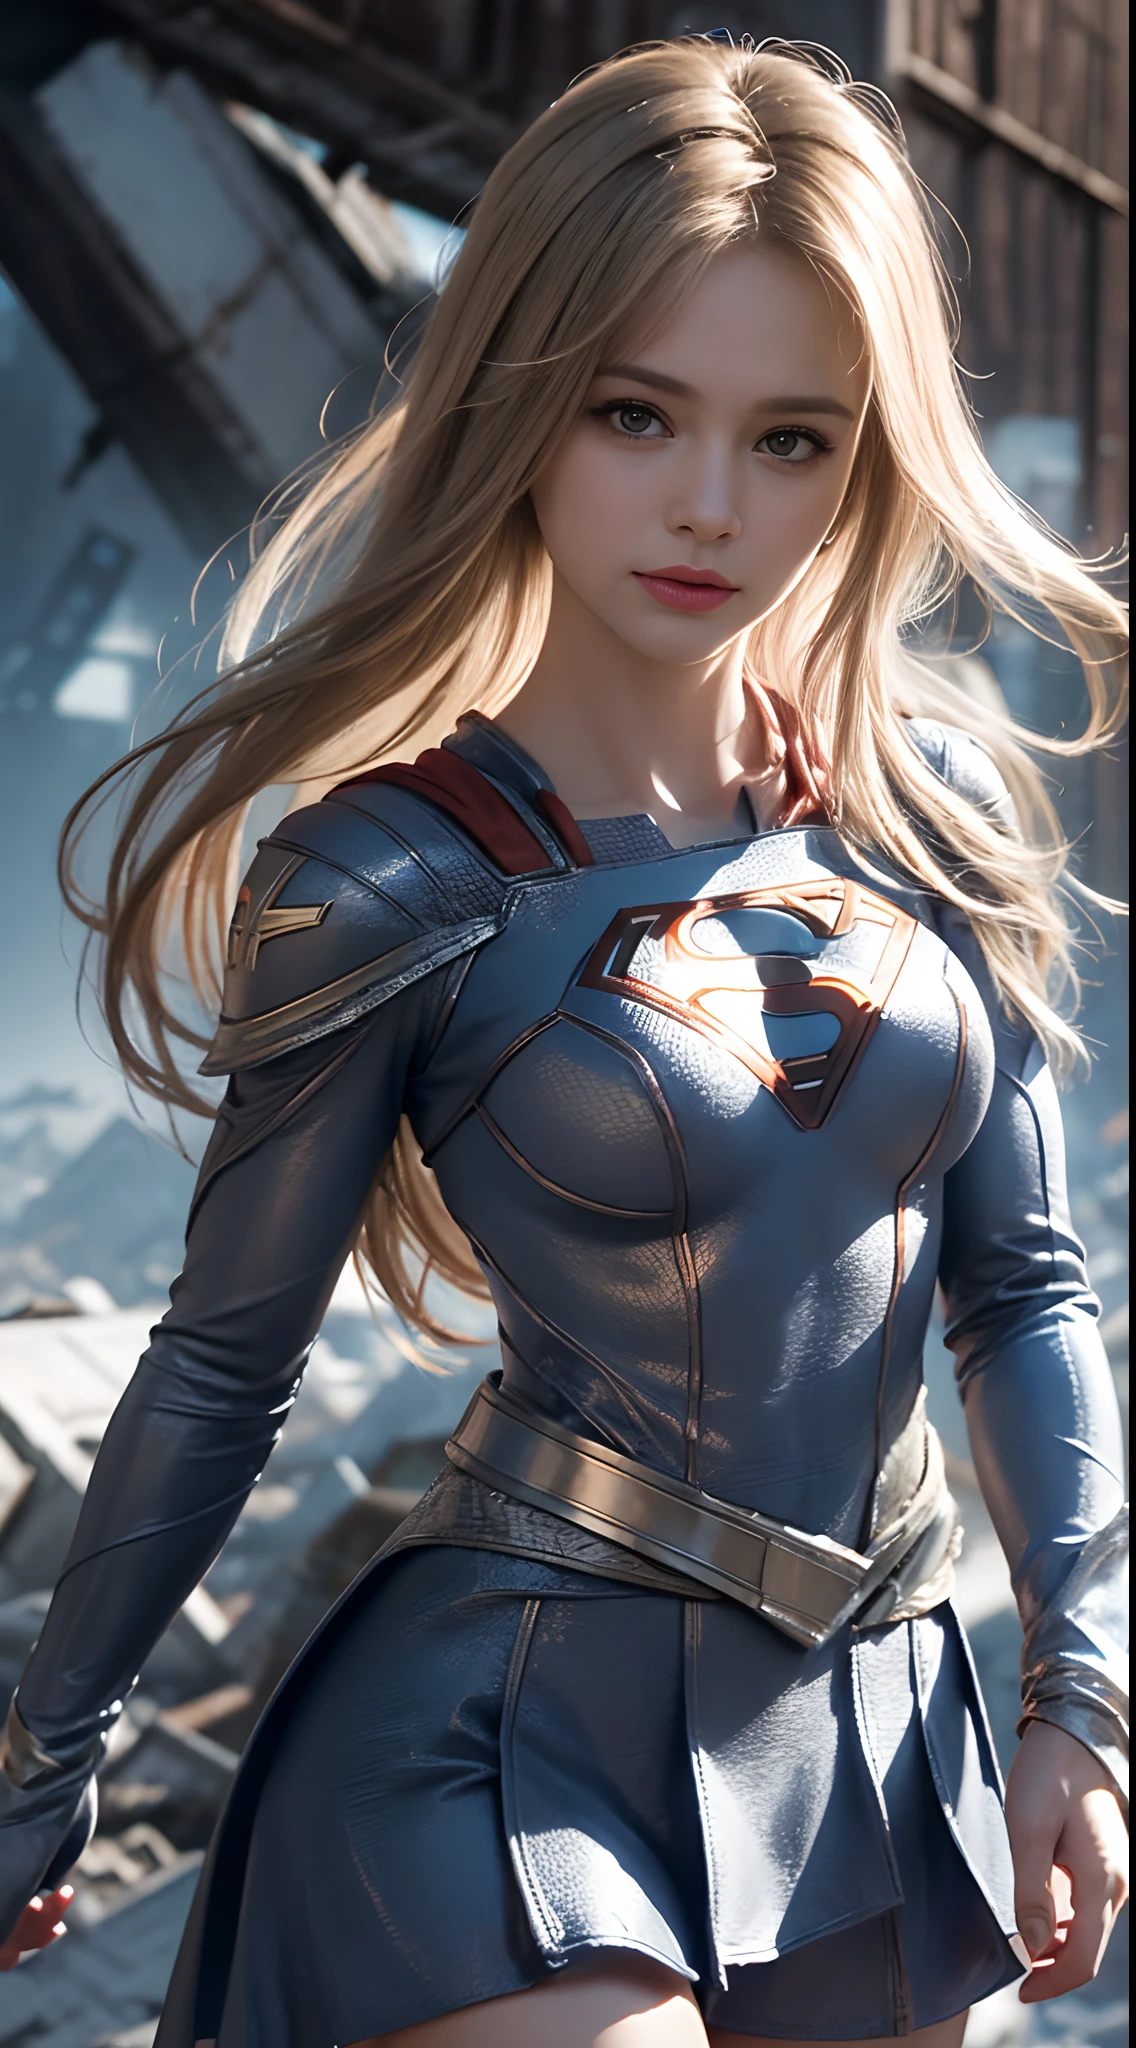 (White Superhero Theme Supergirl),( Apocalyptic destroyed city:1.4),(Supergirl:1.4), (gray white hair ),More detailed 8K.unreal engine:1.4,UHD,La Best Quality:1.4, photorealistic:1.4, skin texture:1.4, Masterpiece:1.8,first work, Best Quality,object object], (detailed face features:1.3), (detailed hands:1.4),